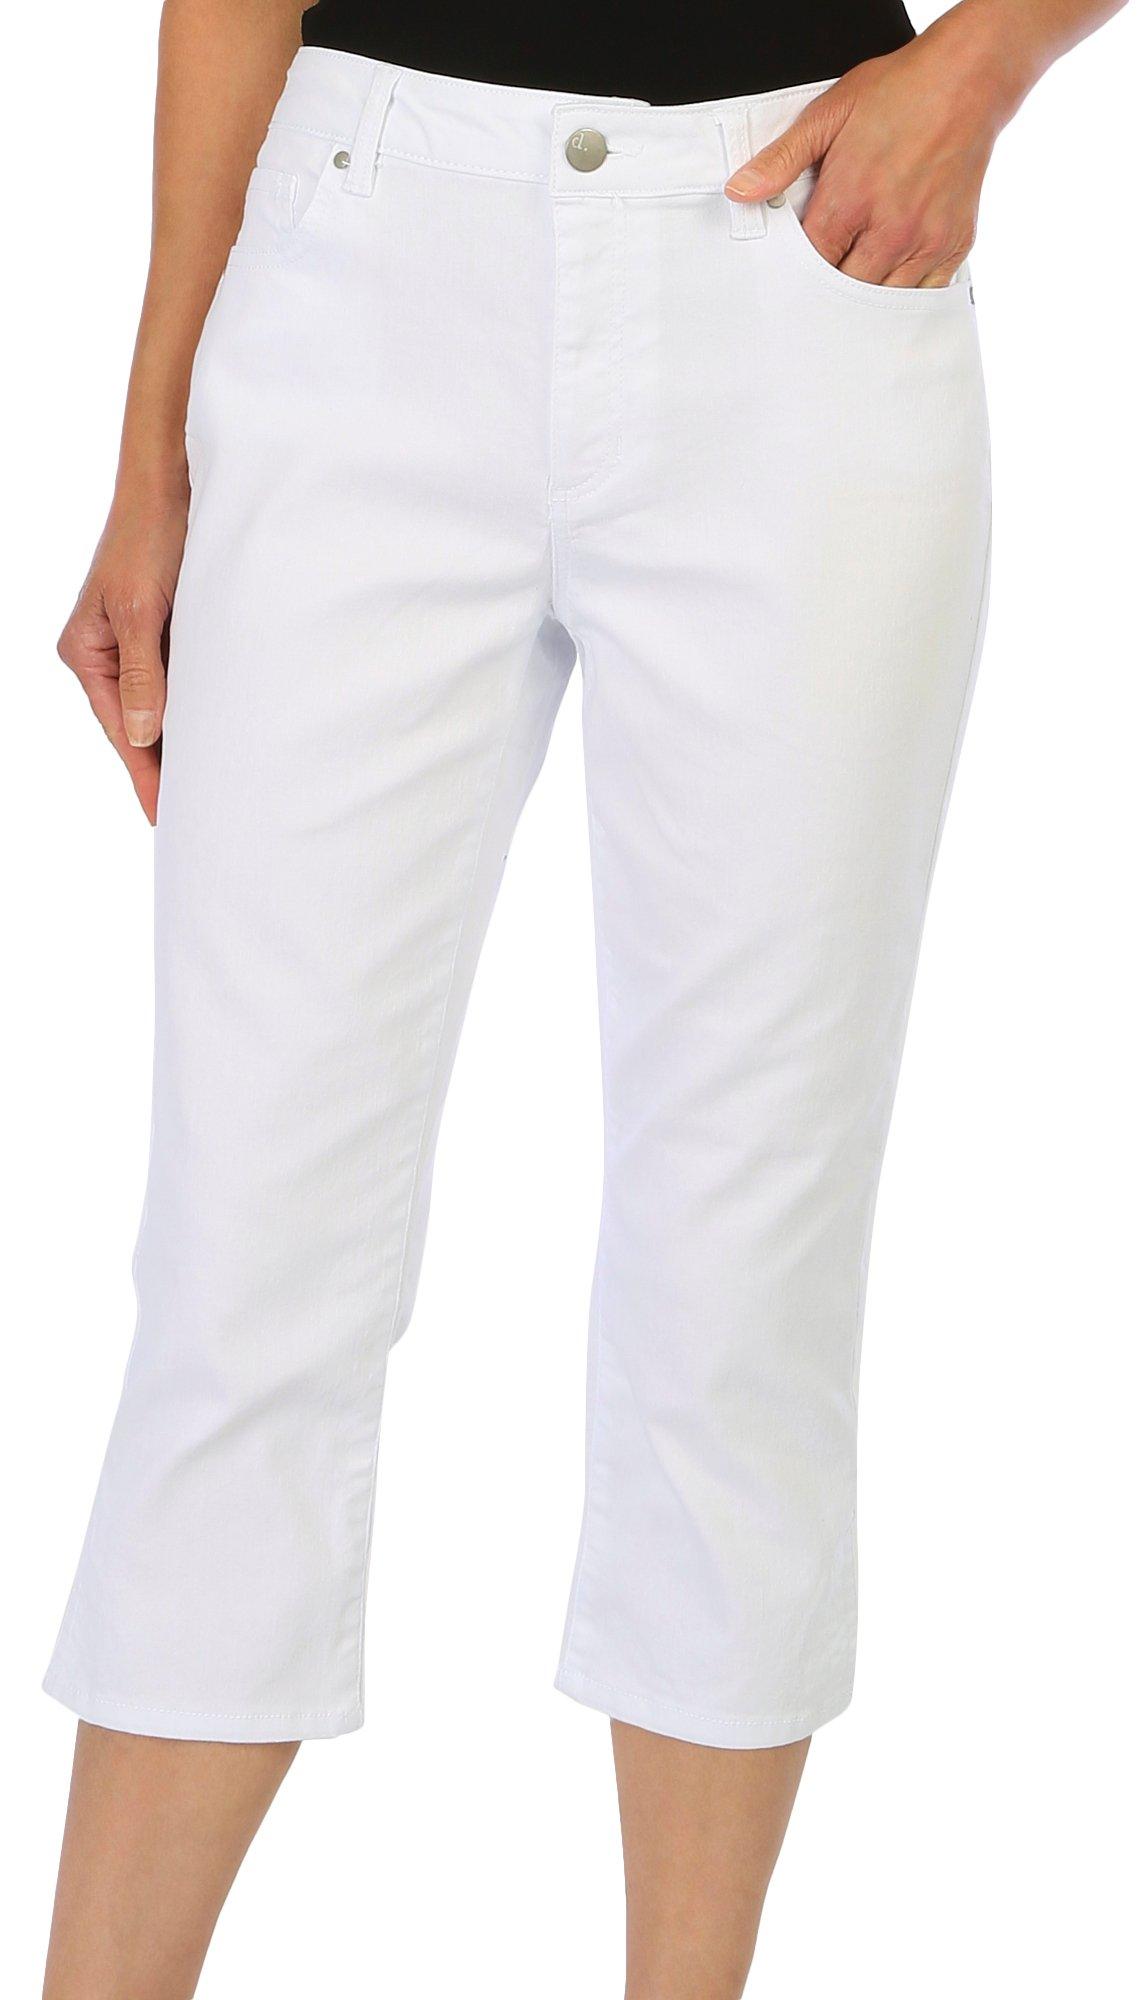 Womens 21 in. Twill High Waist Side Vent Capris